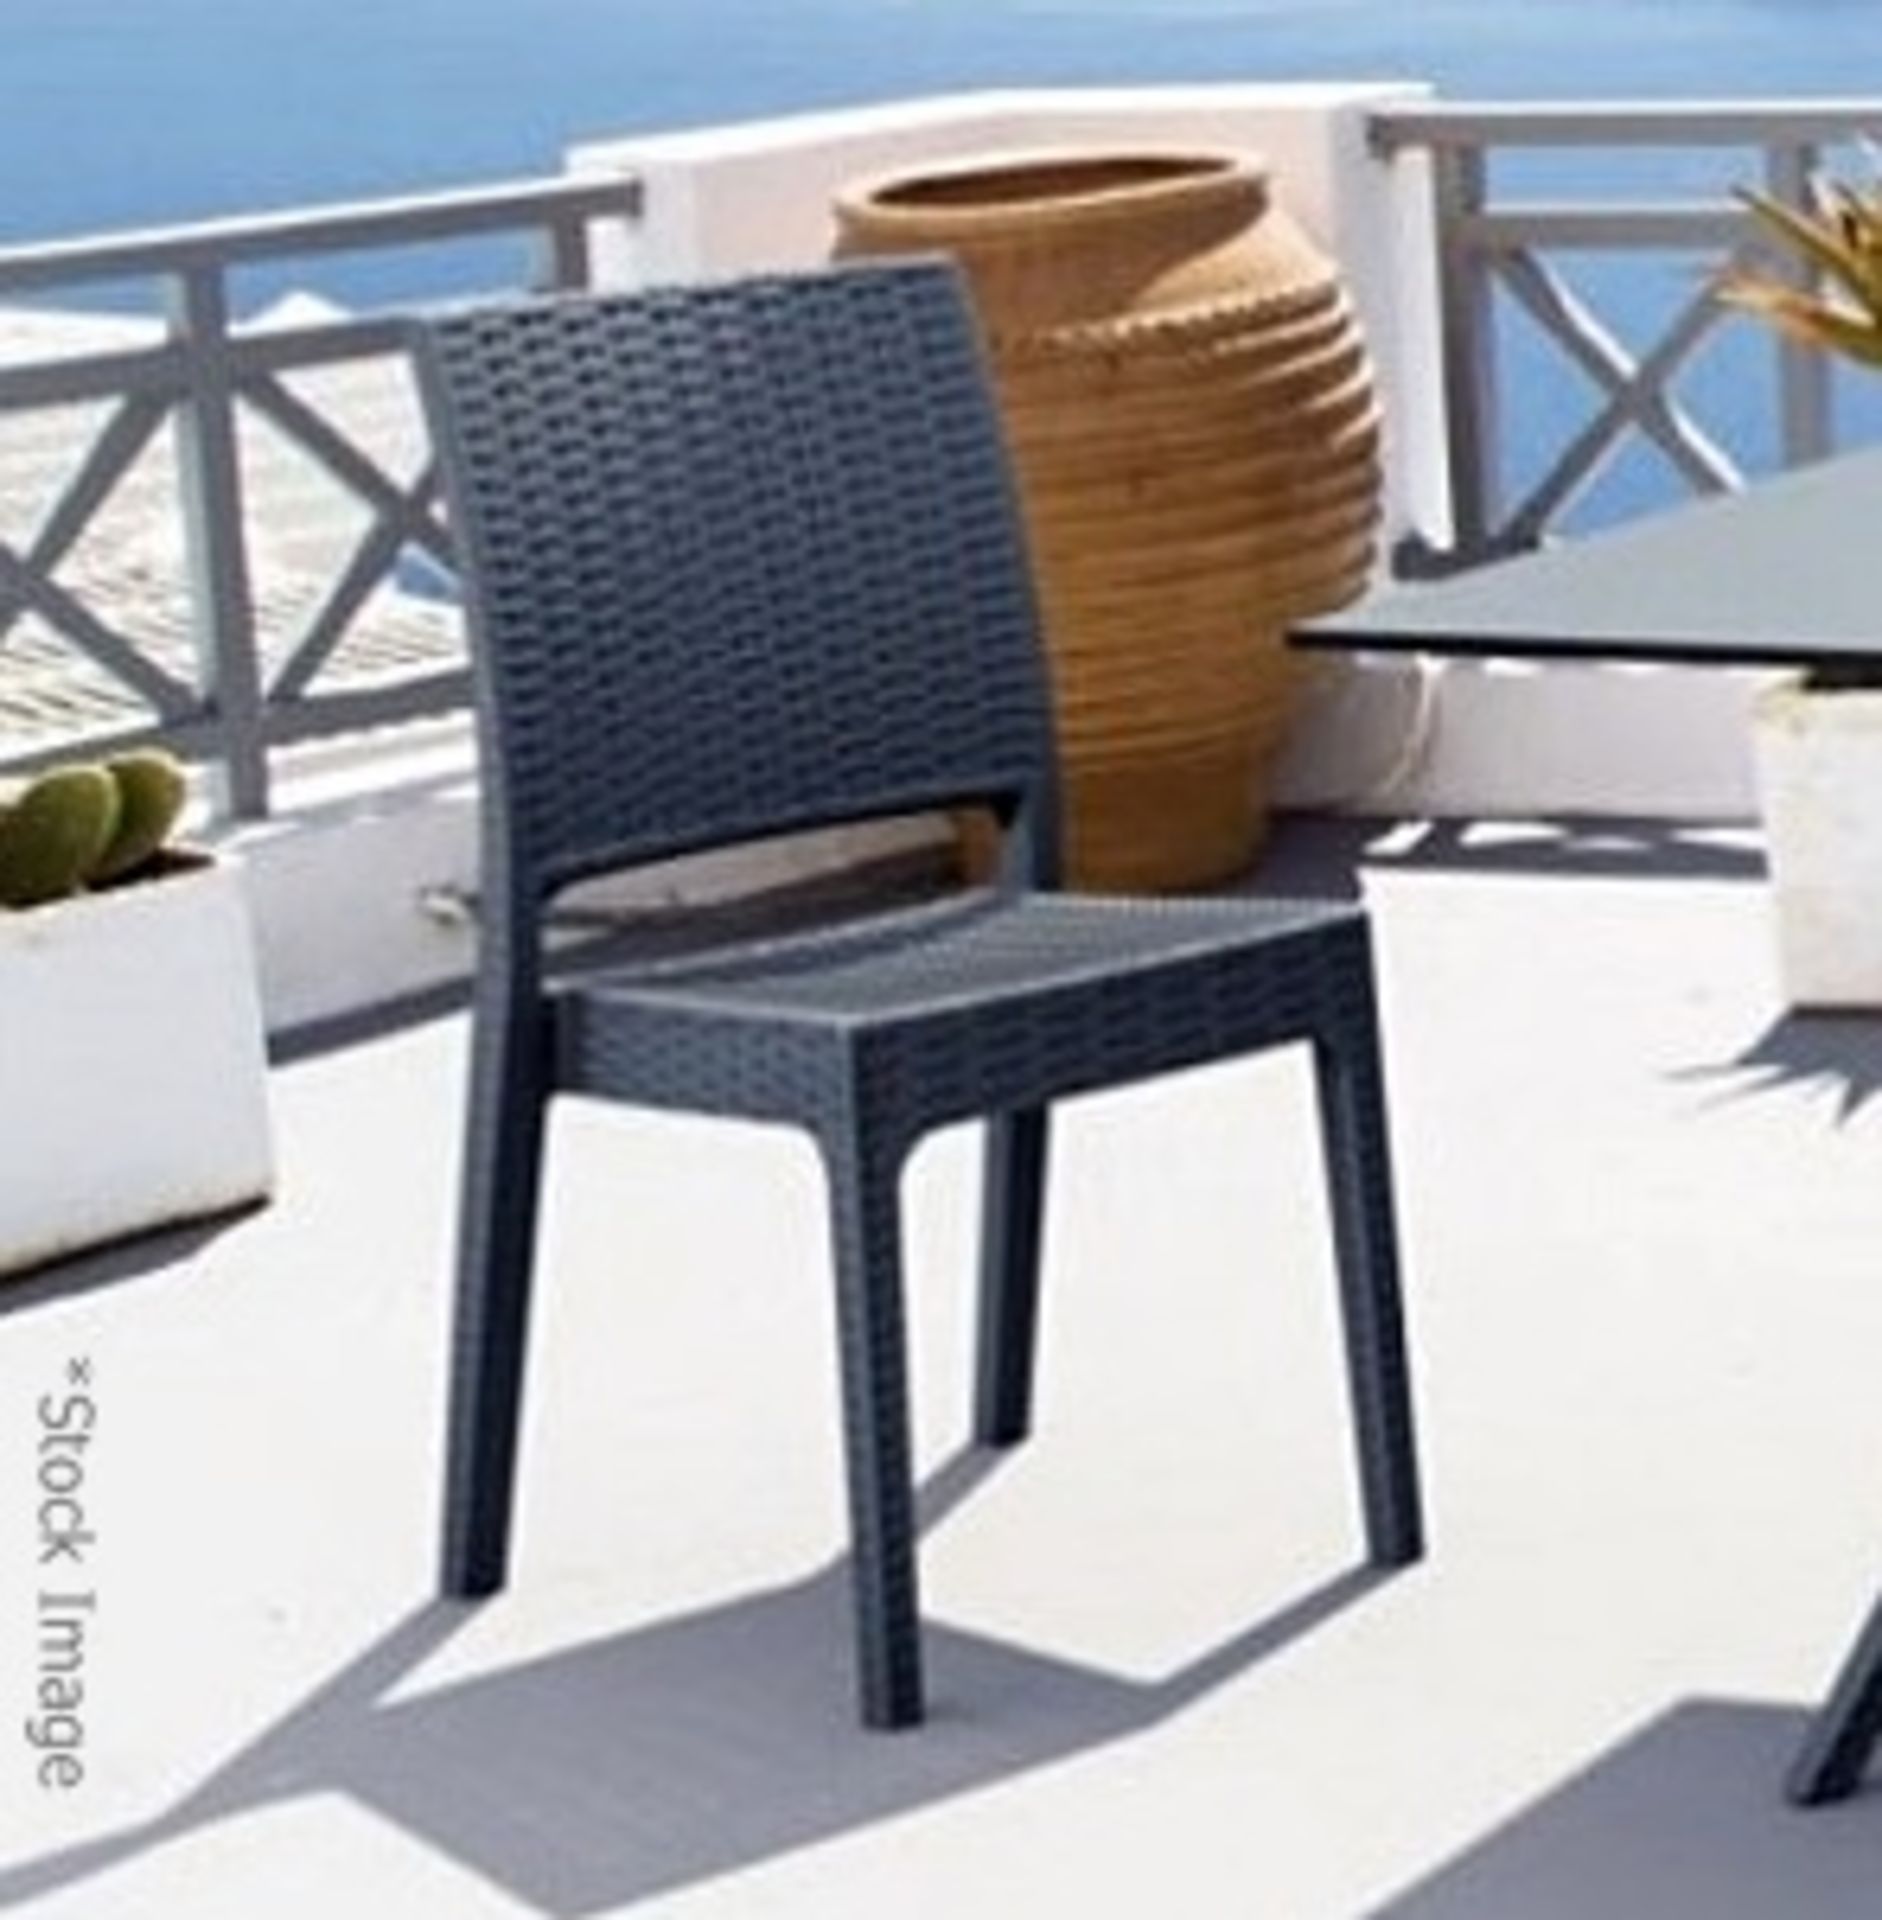 8 x Siesta 'Florida' Rattan Style Garden Chairs In Dark Grey - Suitable For Commercial or Home Use - - Image 12 of 21